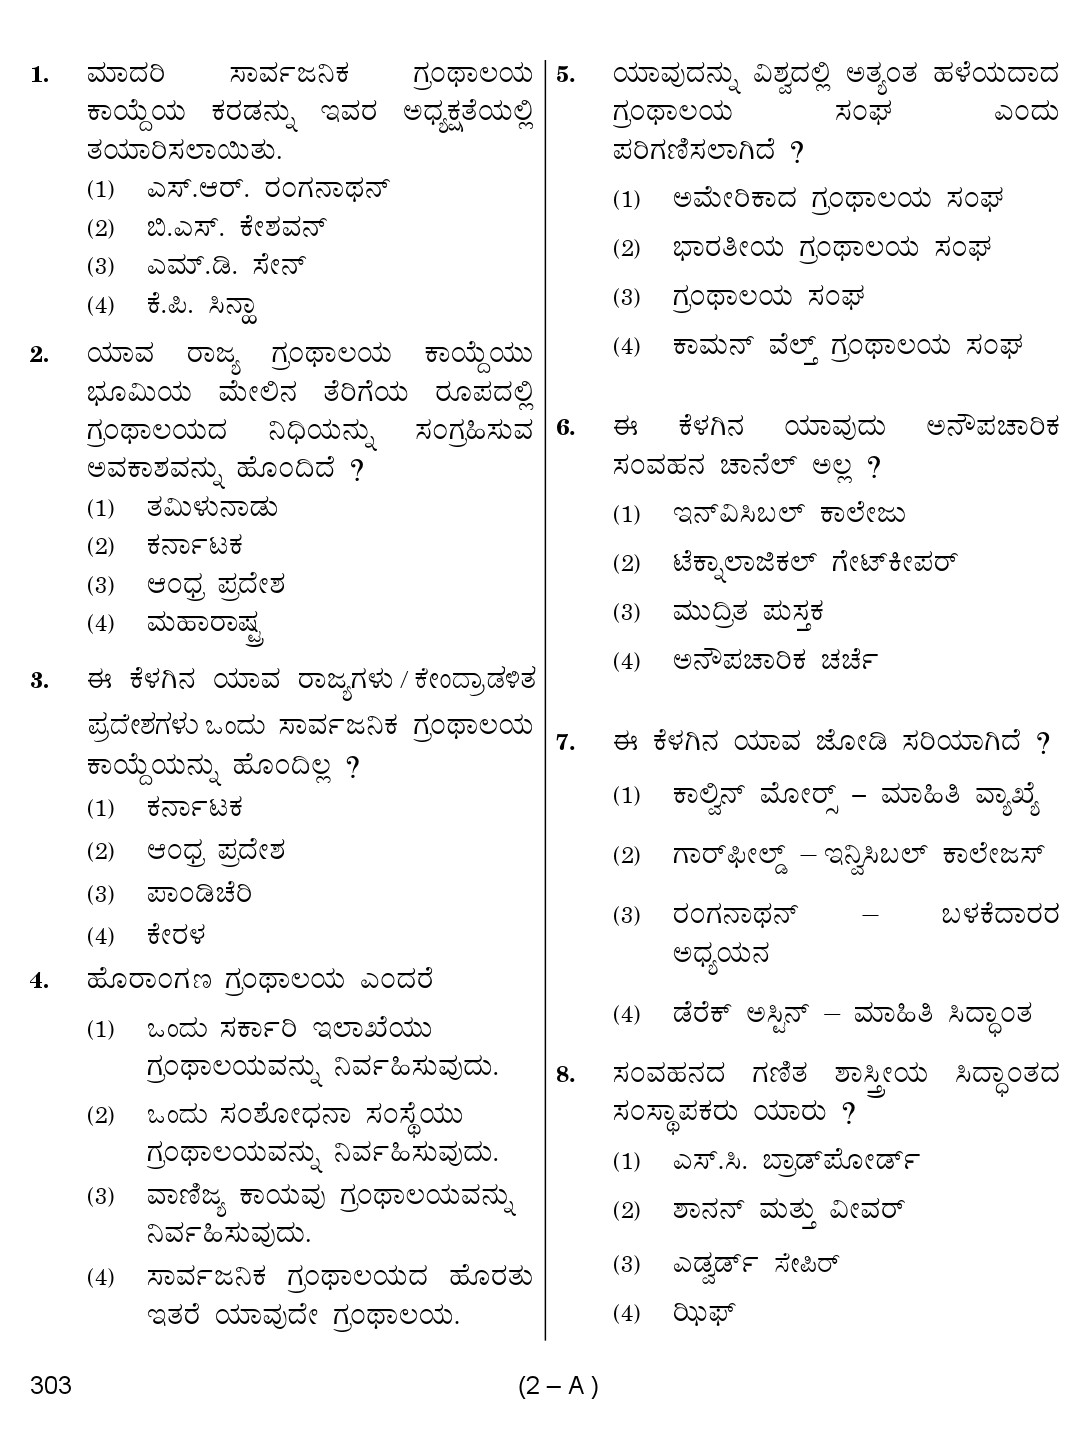 Karnataka PSC 303 Specific Paper II Librarian Exam Sample Question Paper 2